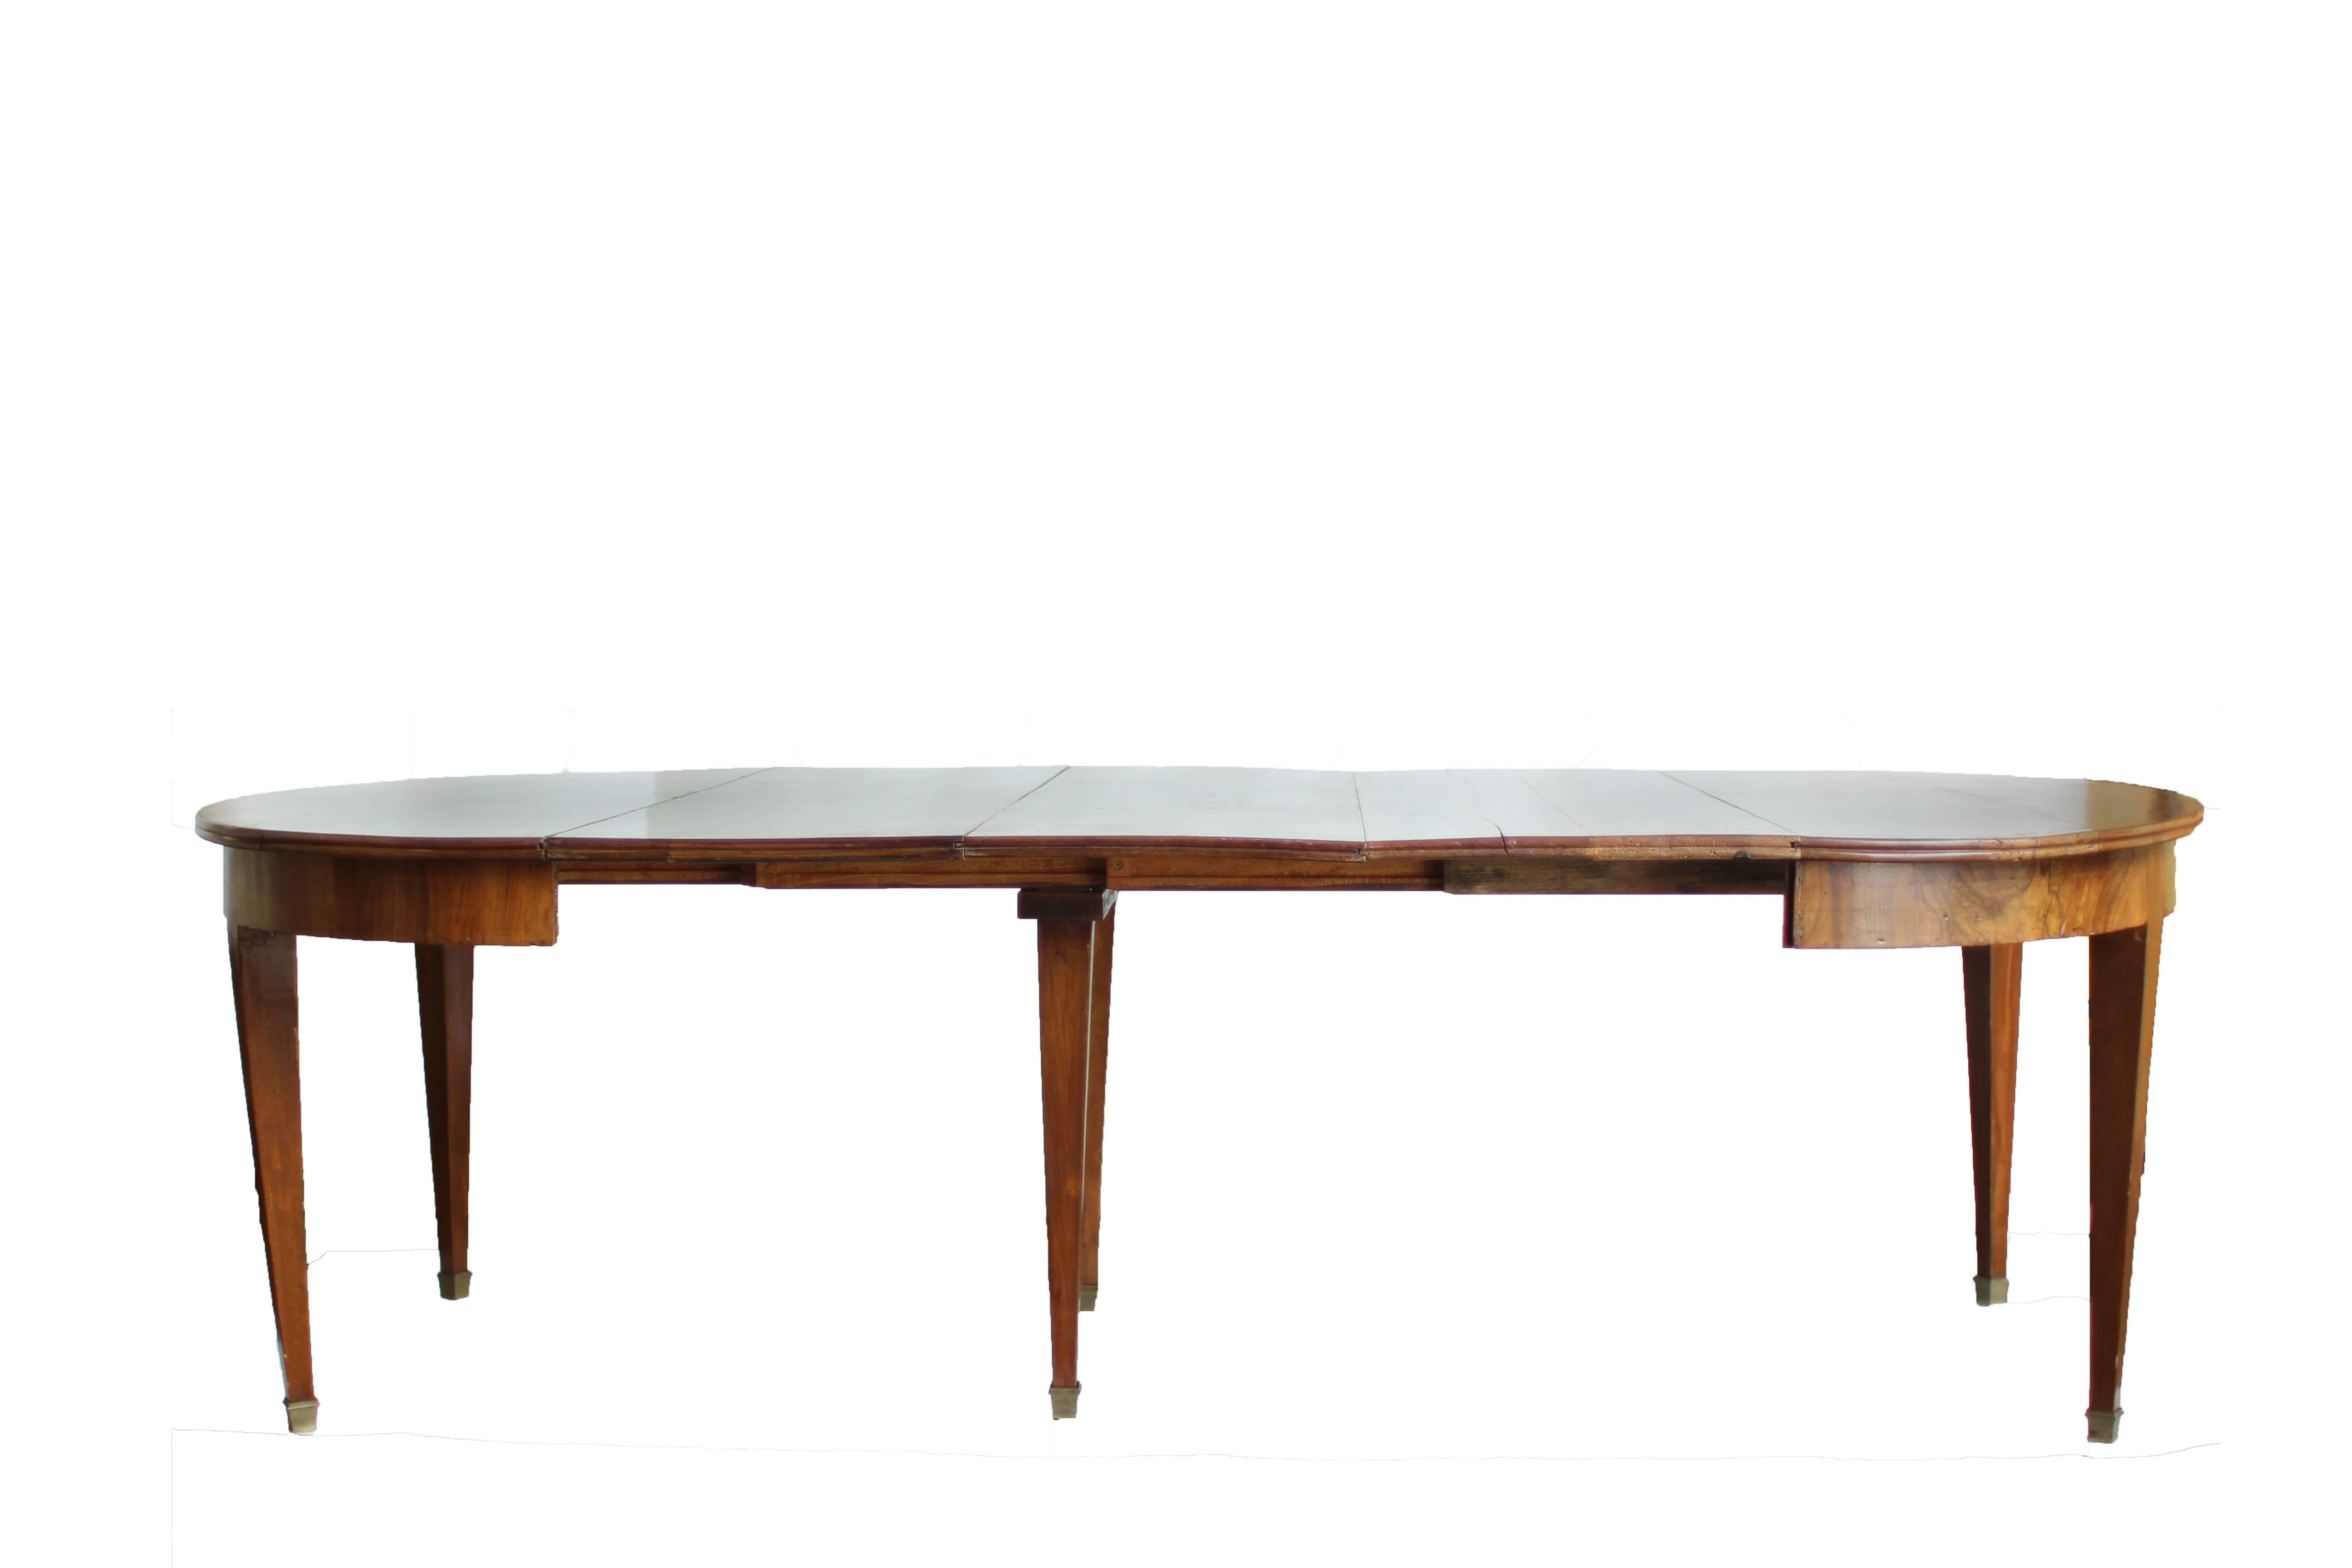 Tara Shaw Antiques - Extraordinary sized 8-foot-long French walnut extending dining table with three removable leaves. The table can extend and accept two additional leaves for a total length of 124.5